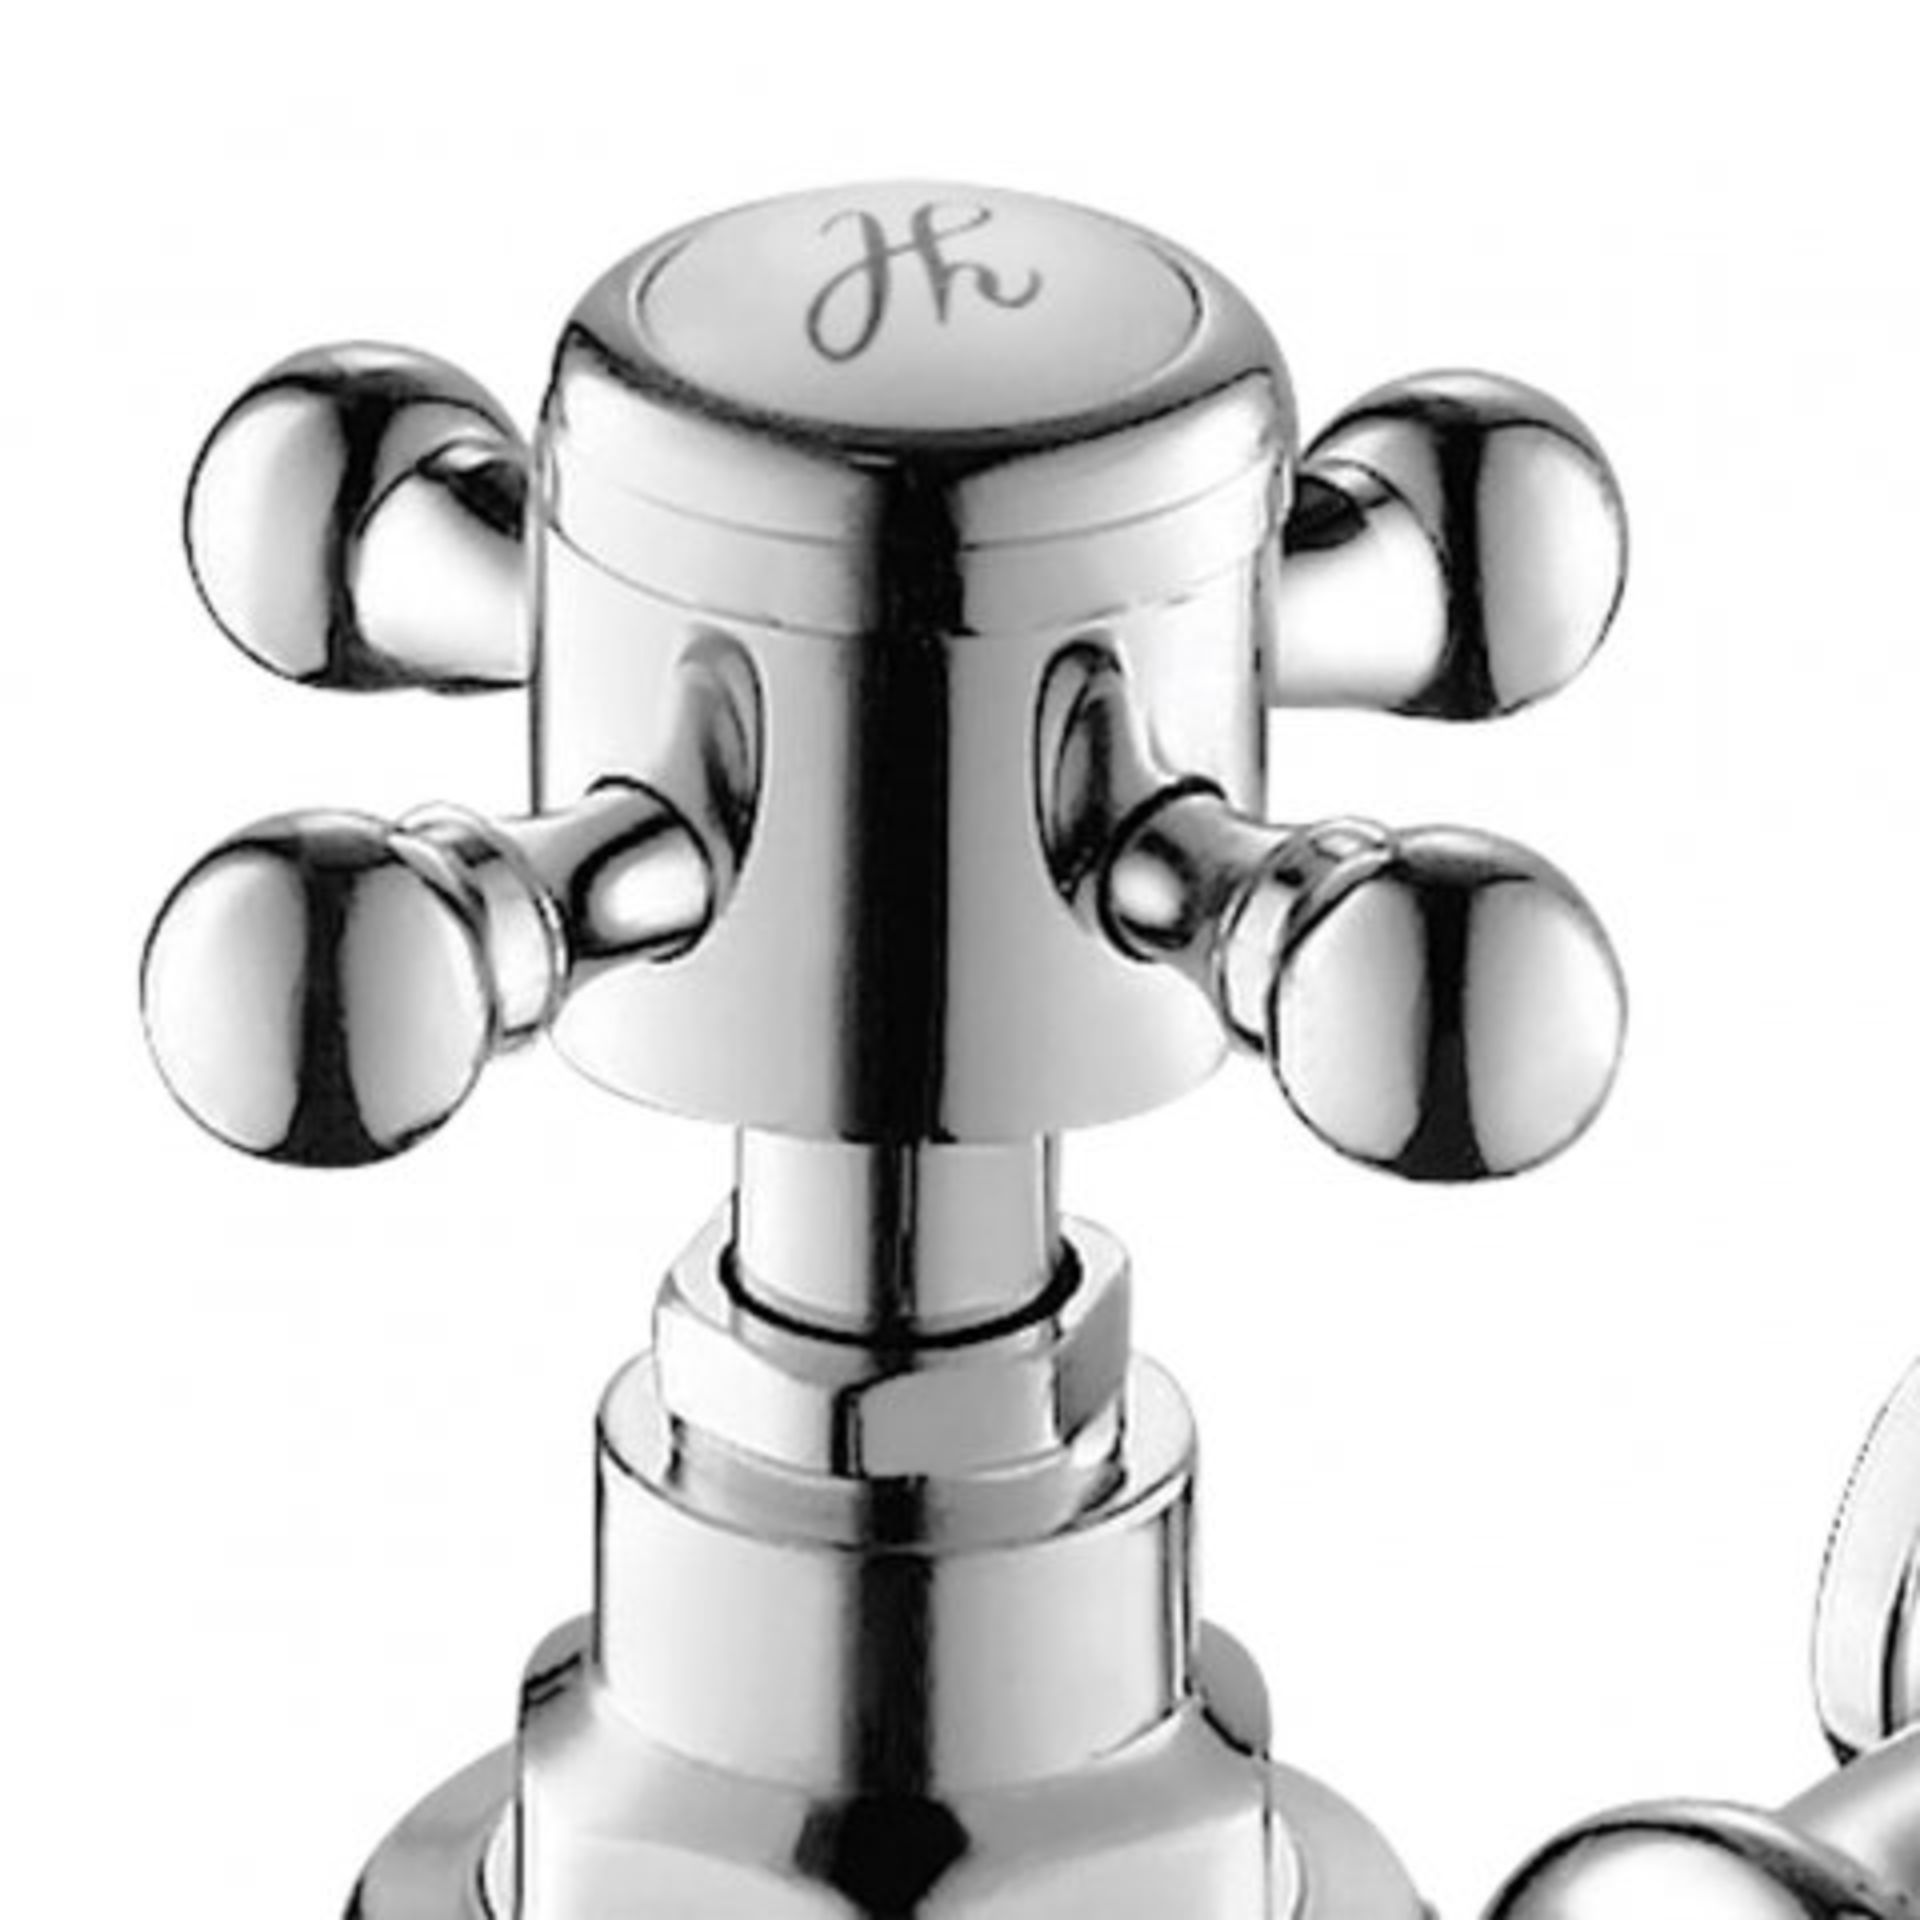 (A553) Victoria II Traditional Bath Mixer Tap. RRP £153.99. Our great range of traditional taps - Image 4 of 5